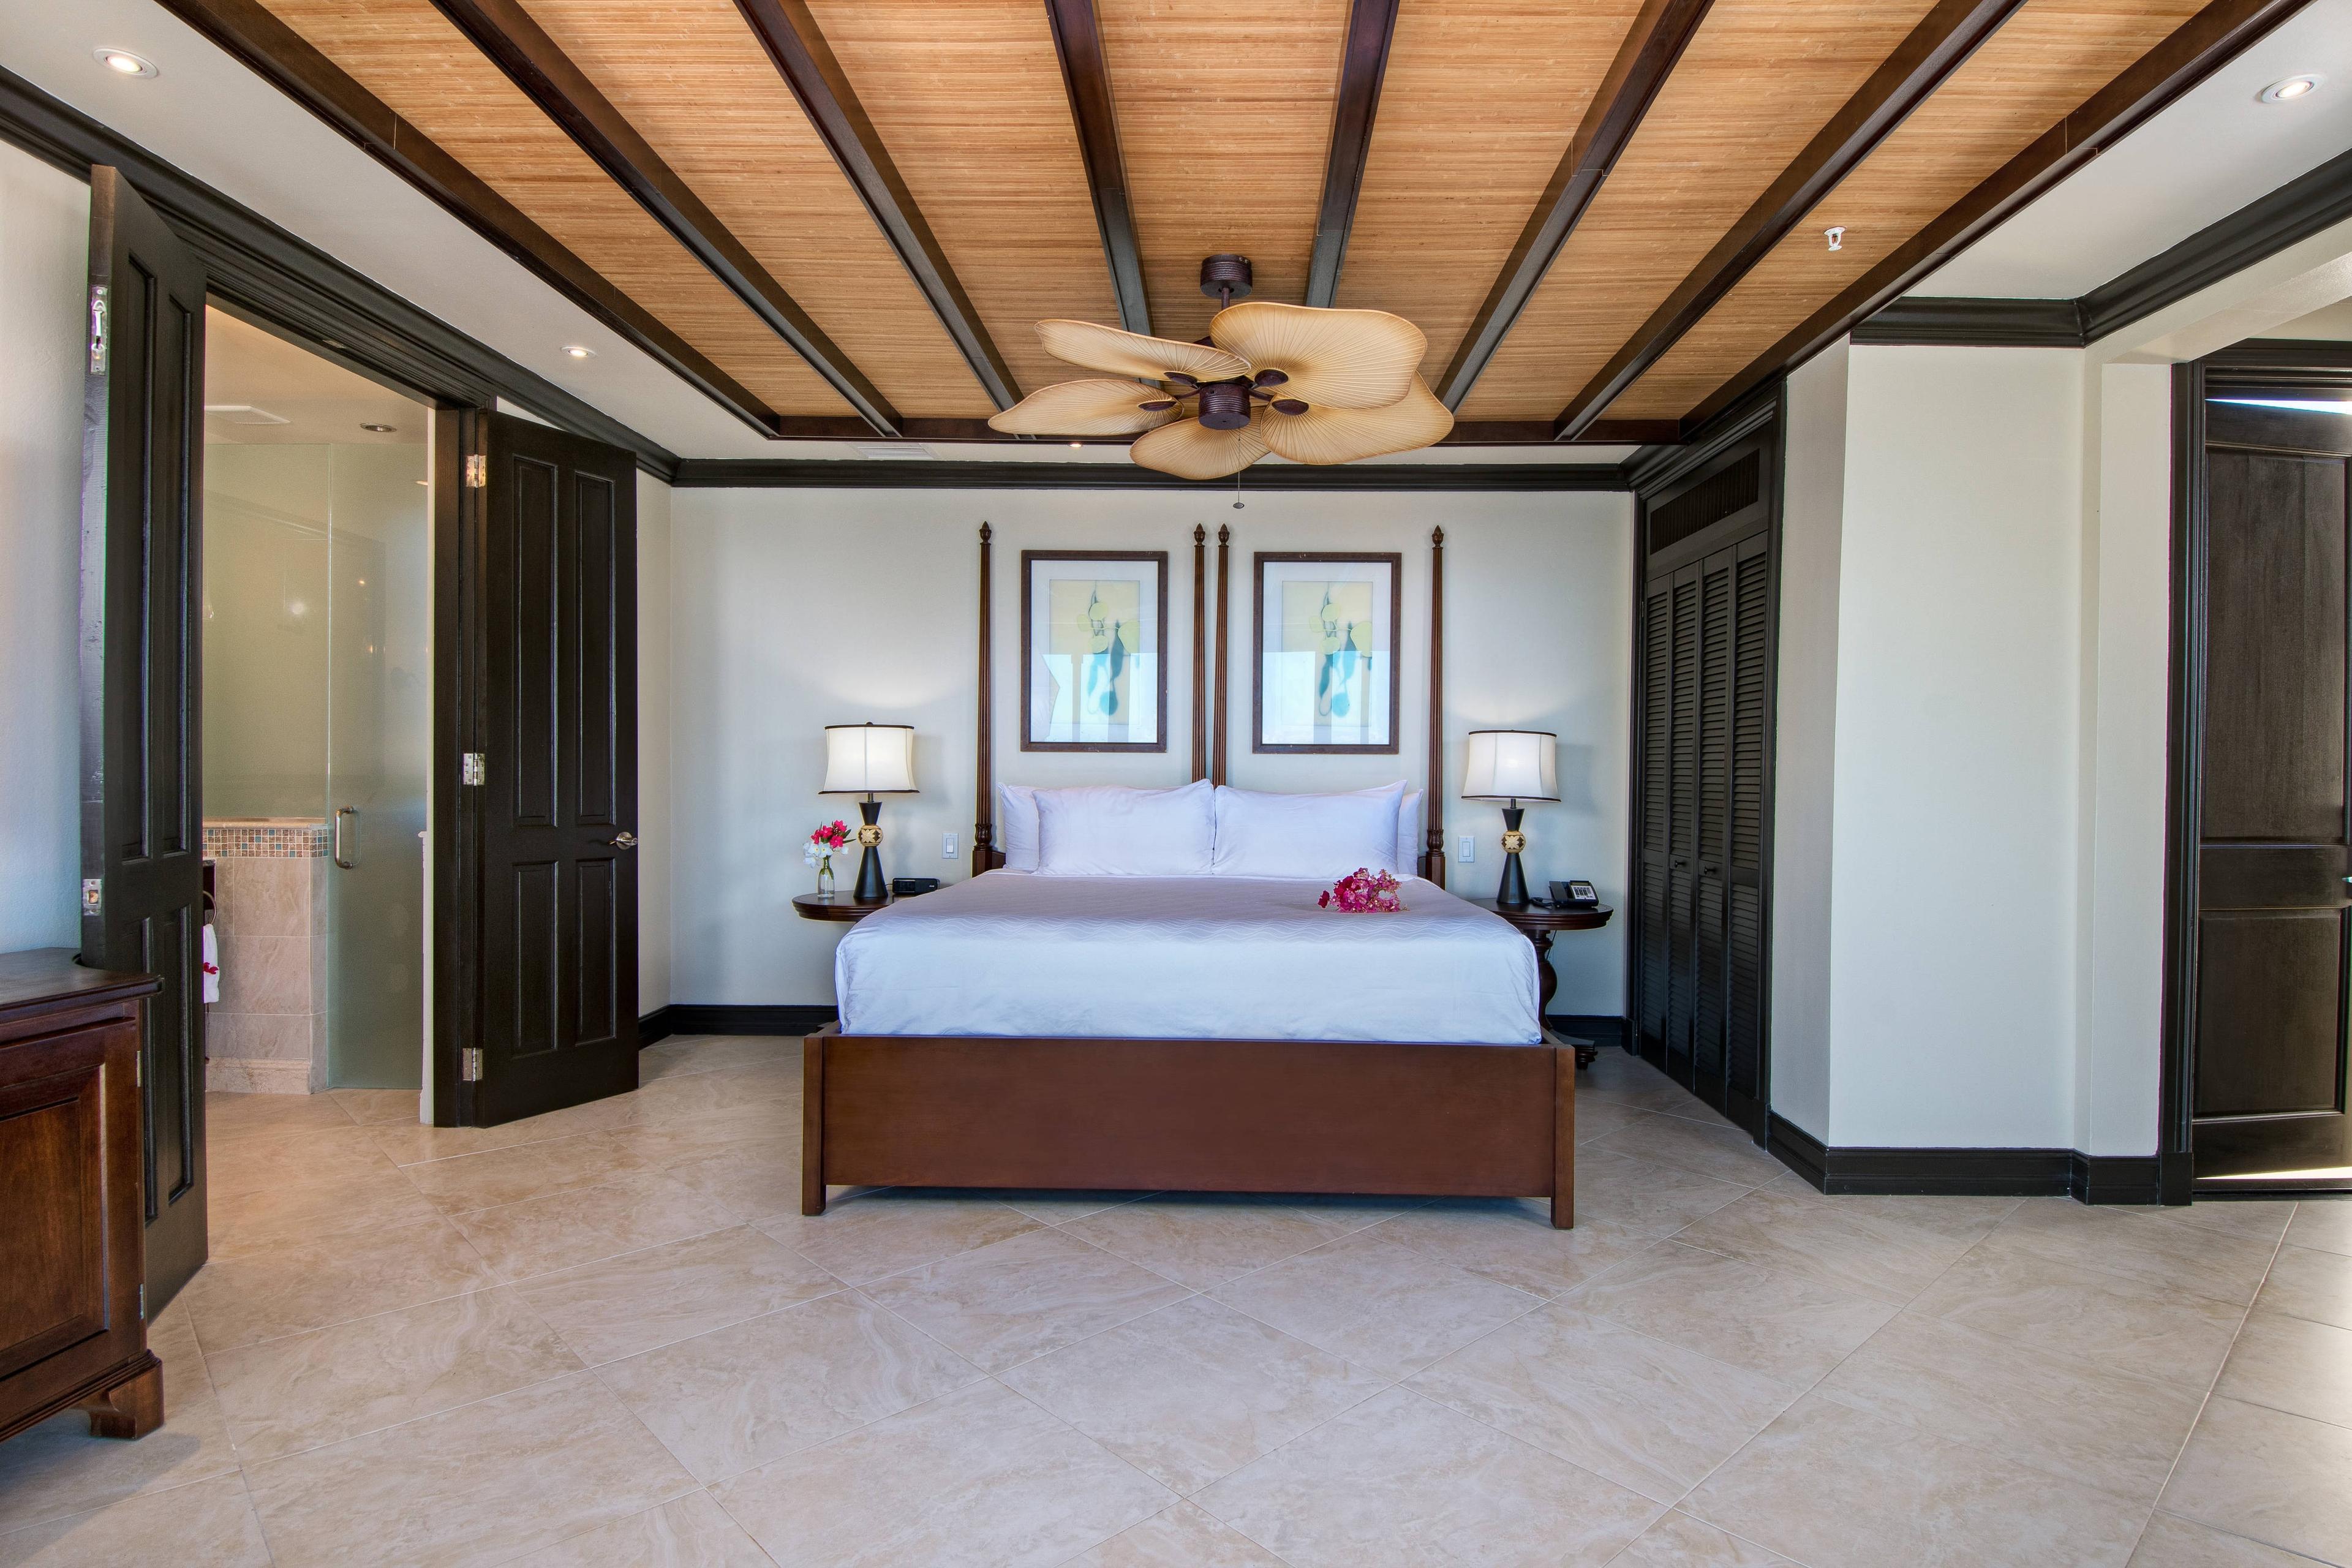 Retreat to your king-size bed for the ultimate escape, featuring en-suite bathrooms and Caribbean-inspired decor.